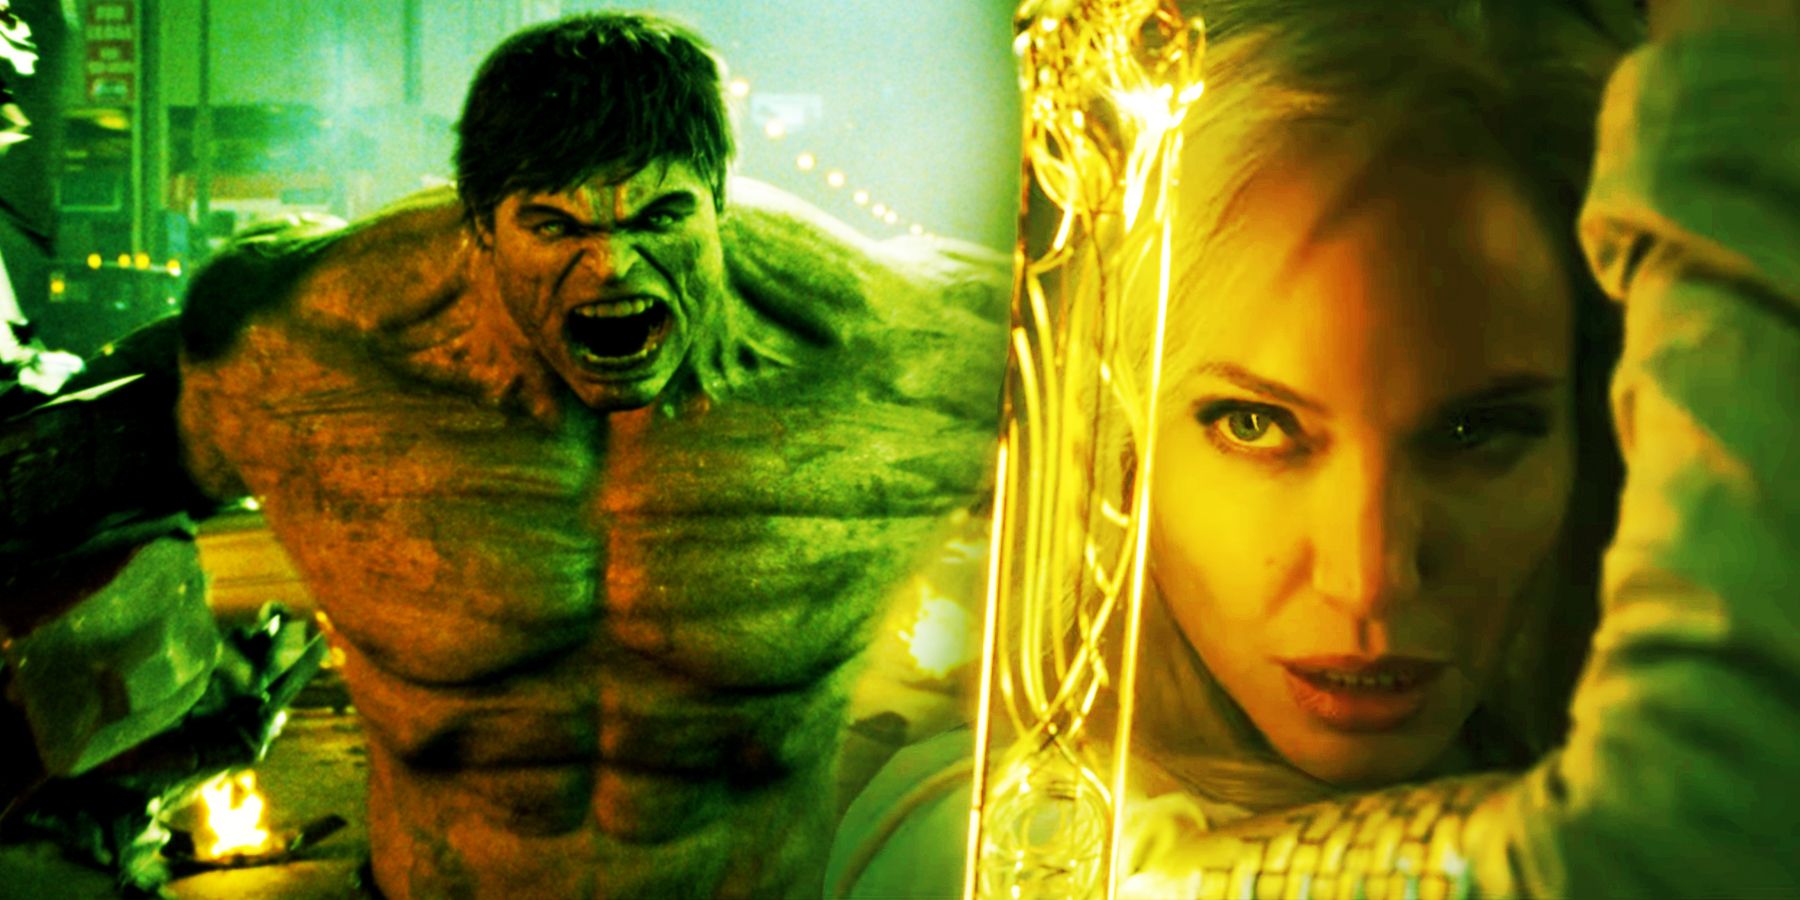 10 Worst Marvel Movies according to Rotten Tomatoes - Vamers